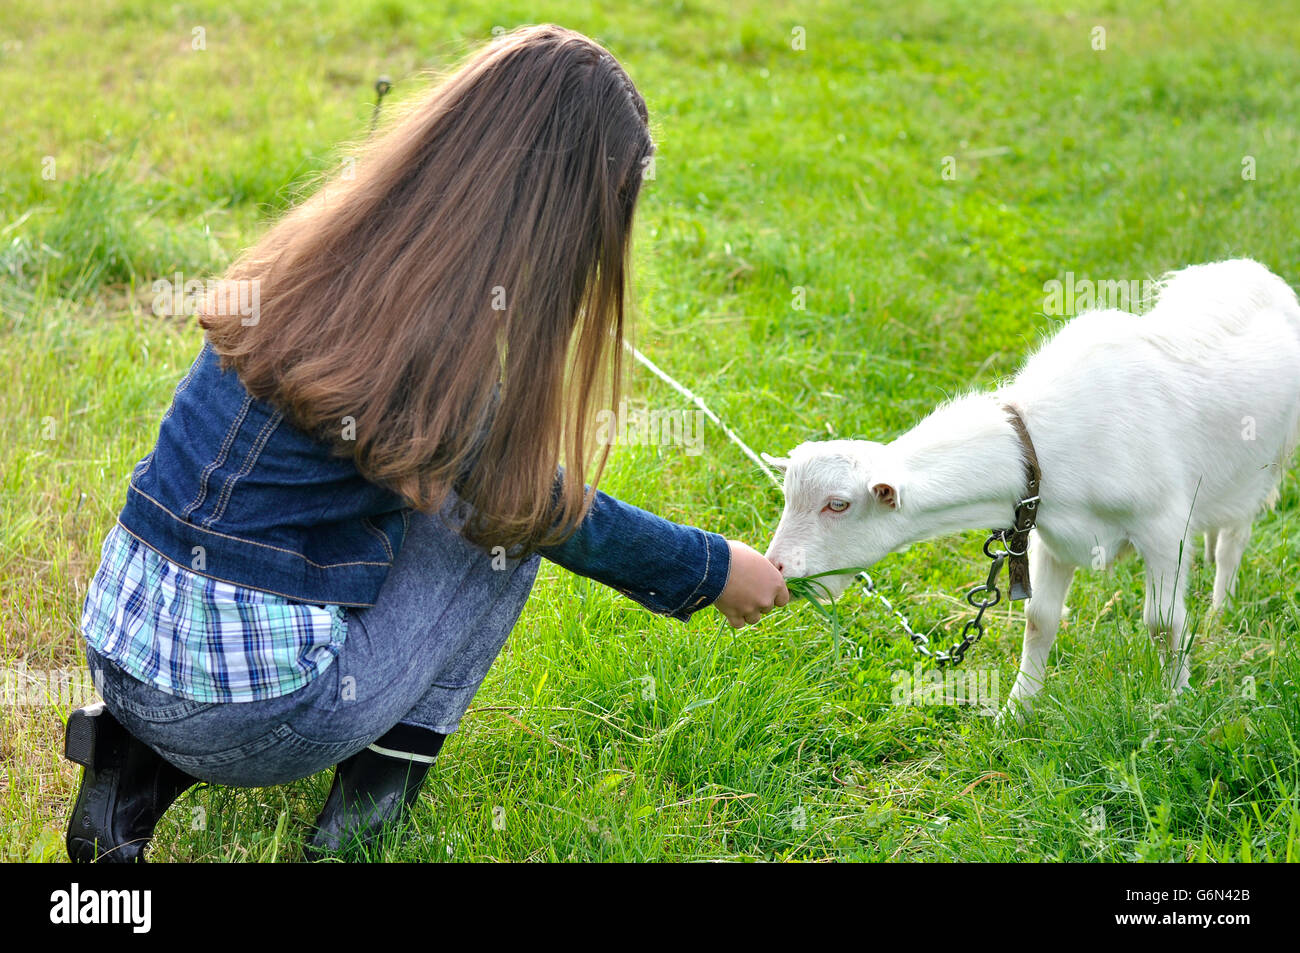 Girl with a white goat on rural meadow Stock Photo